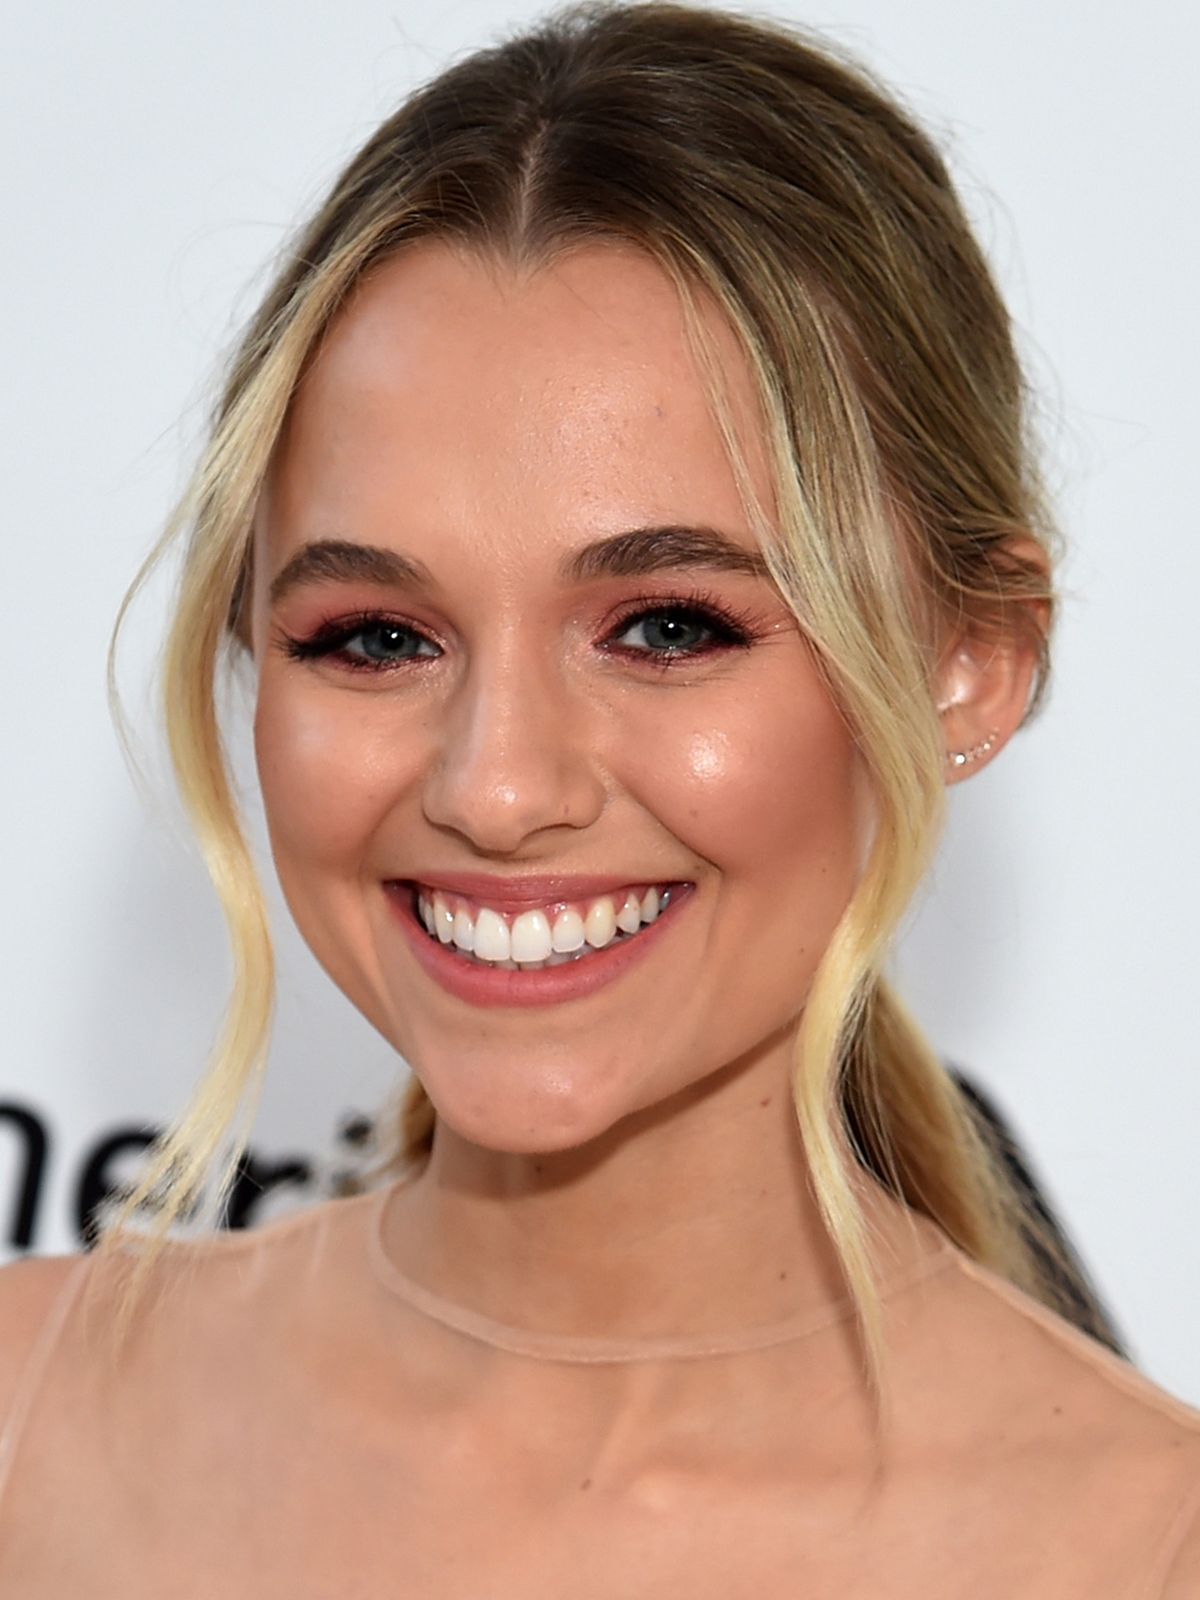 How tall is Madison Iseman?